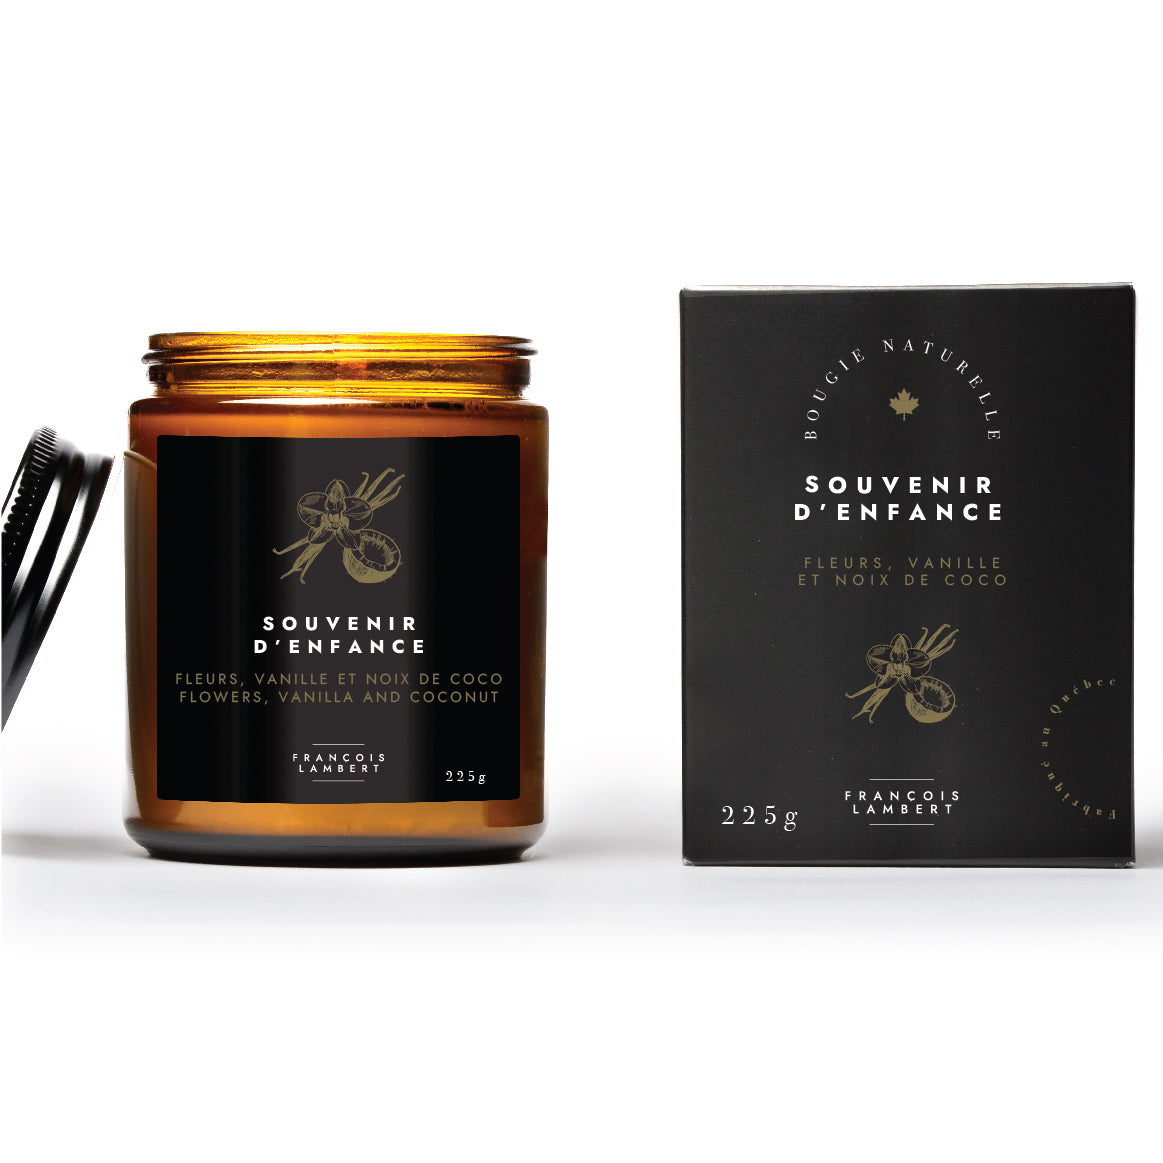 No.8 Childhood memory - Soy candle with flowers, vanilla and coconut